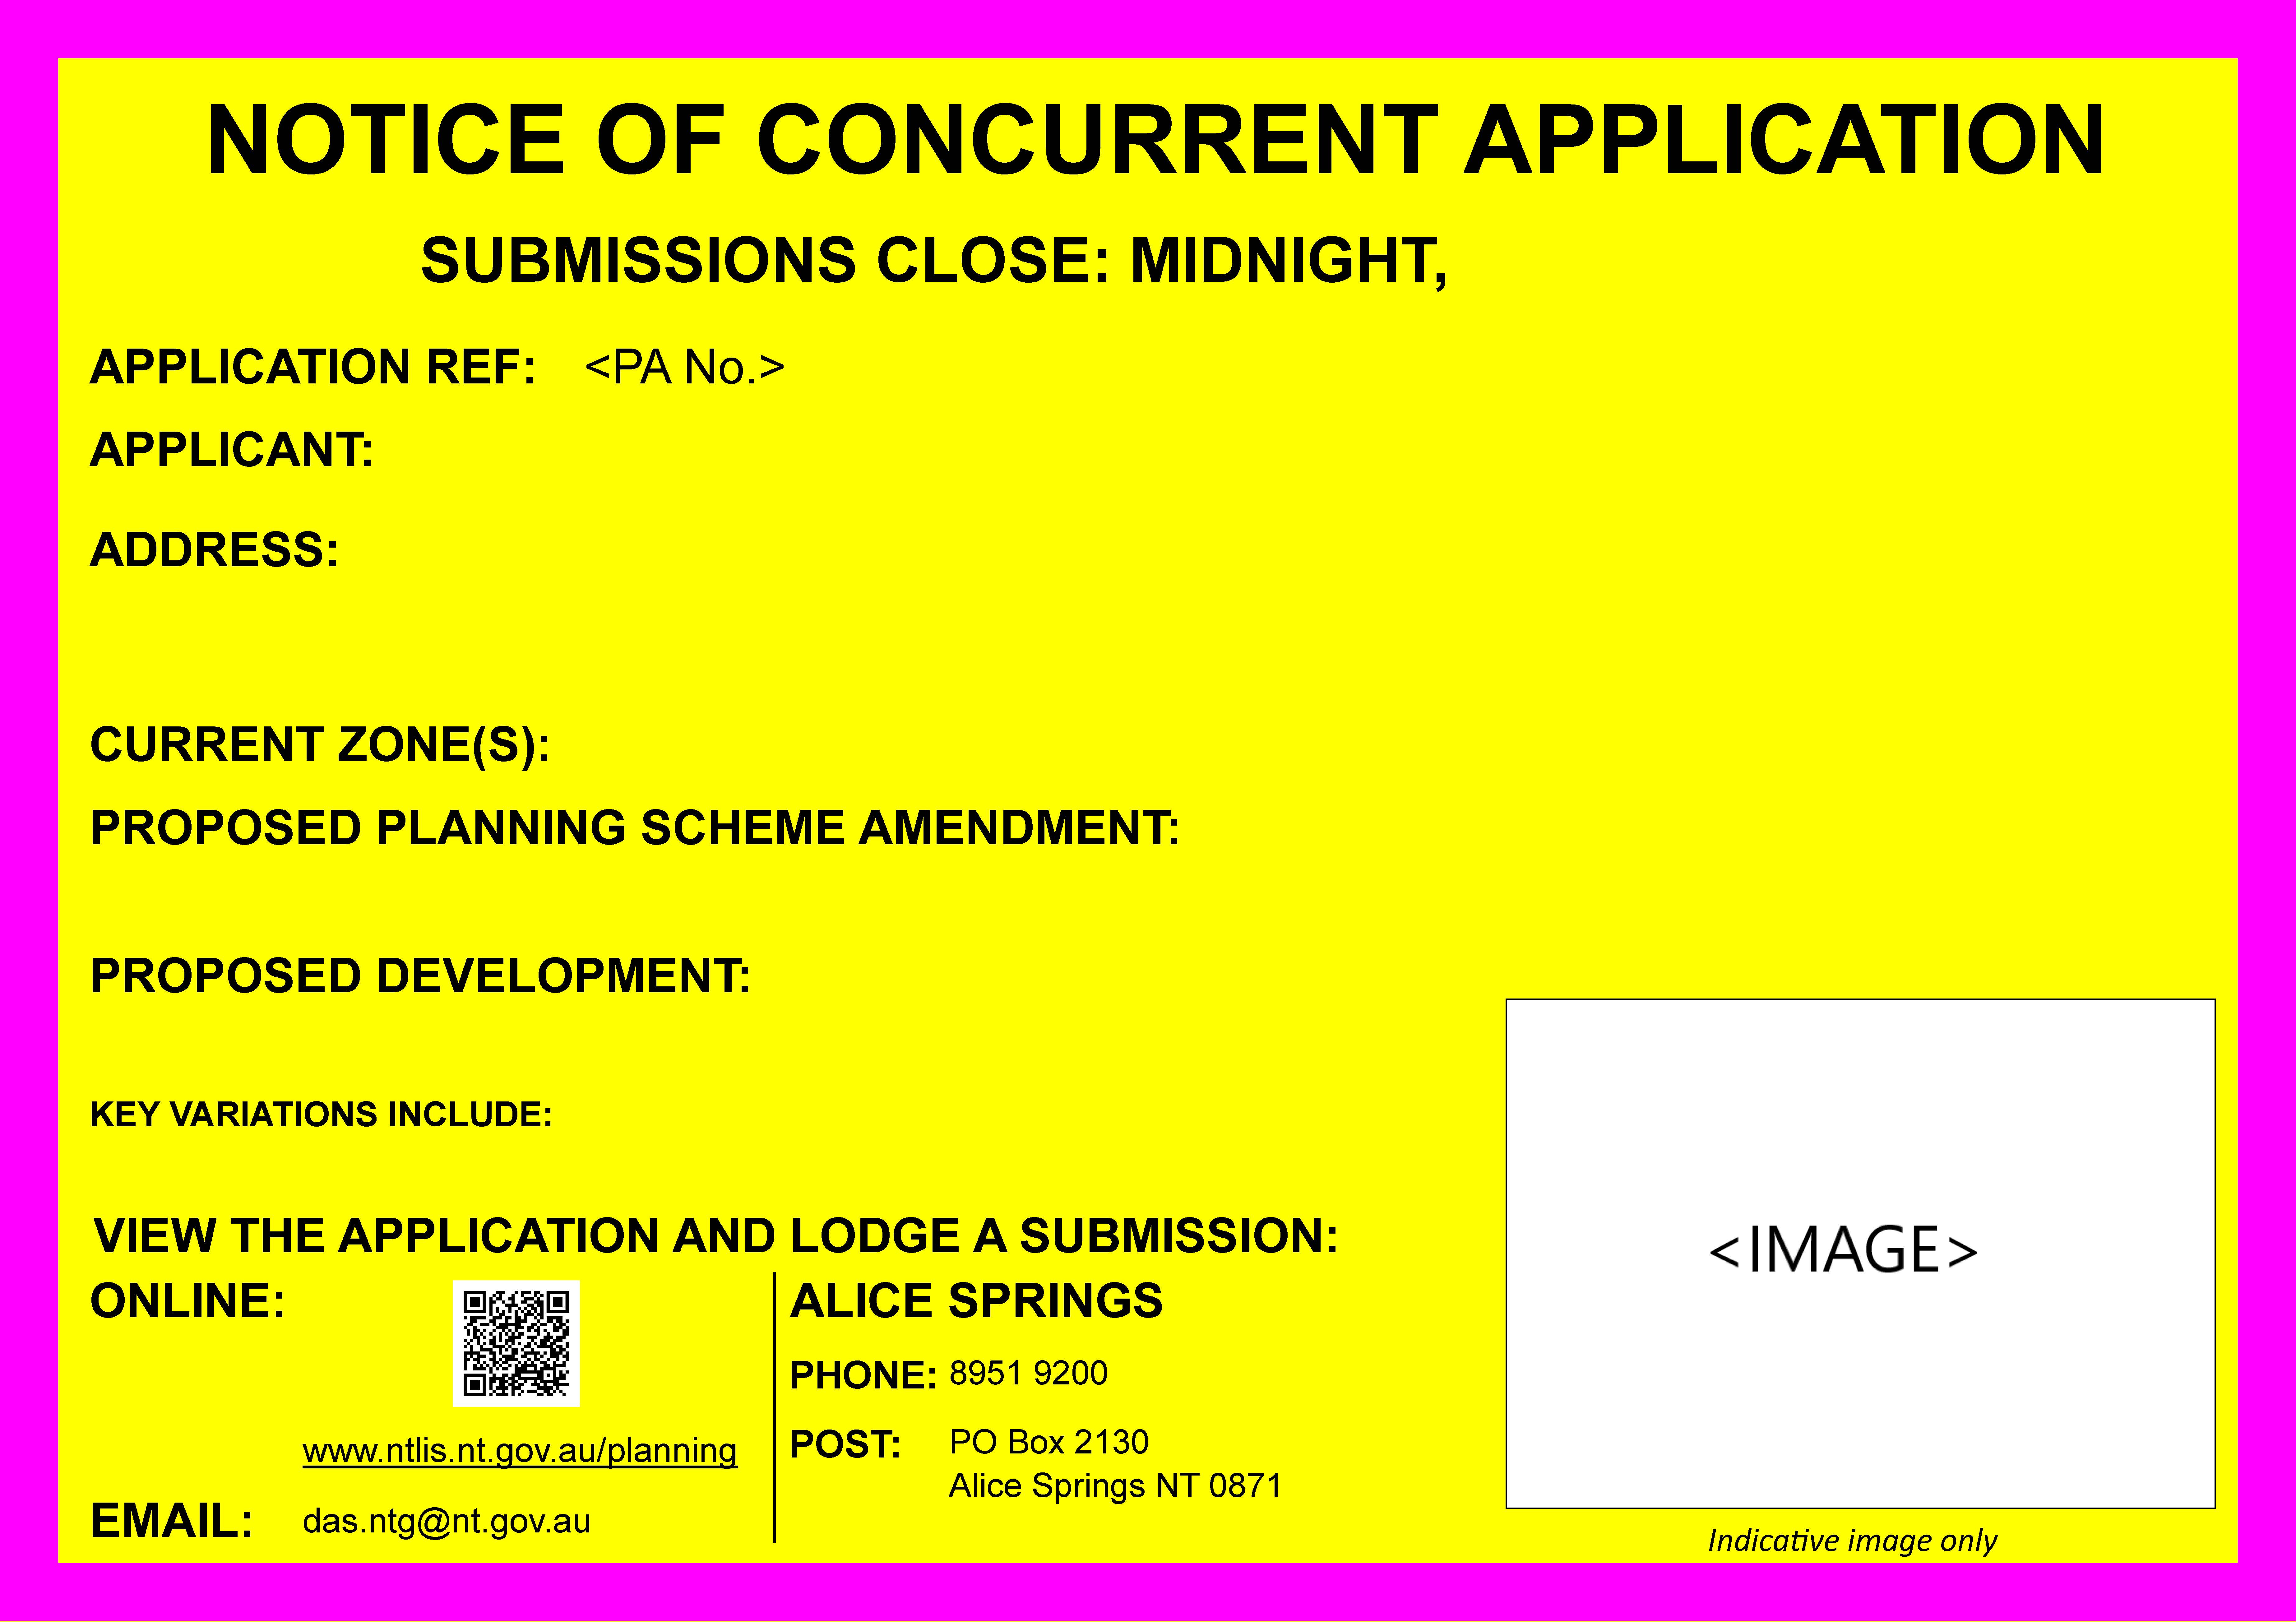 Sample of a notice of concurrent application signage